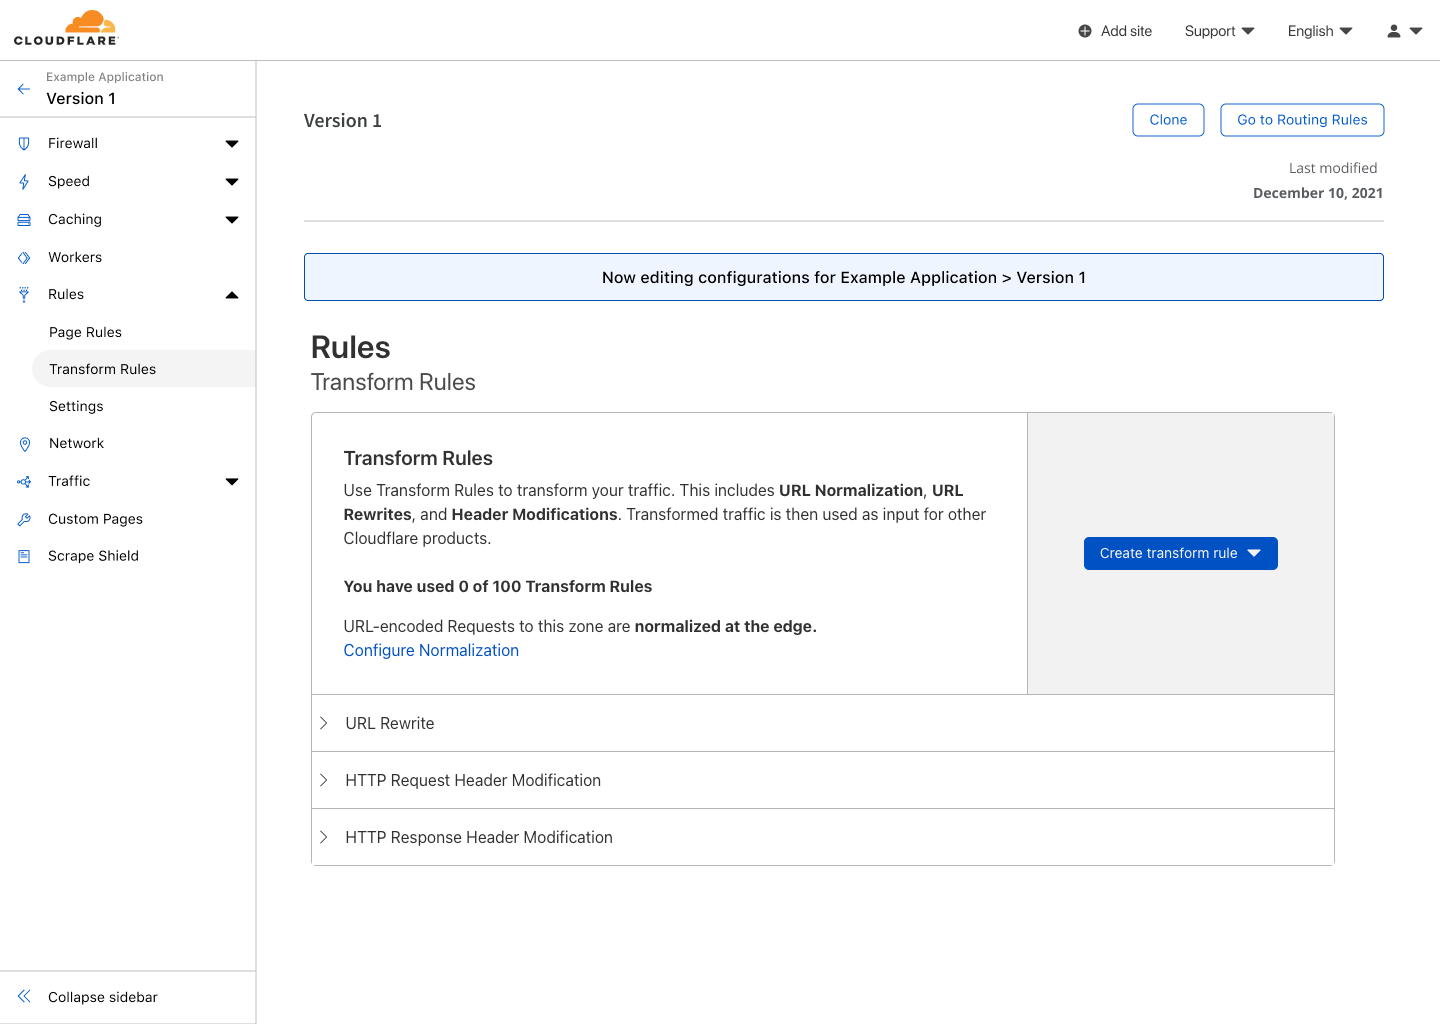 Transform rules of Version 1 showing a new rule named “Rewrite Assets” has been created.